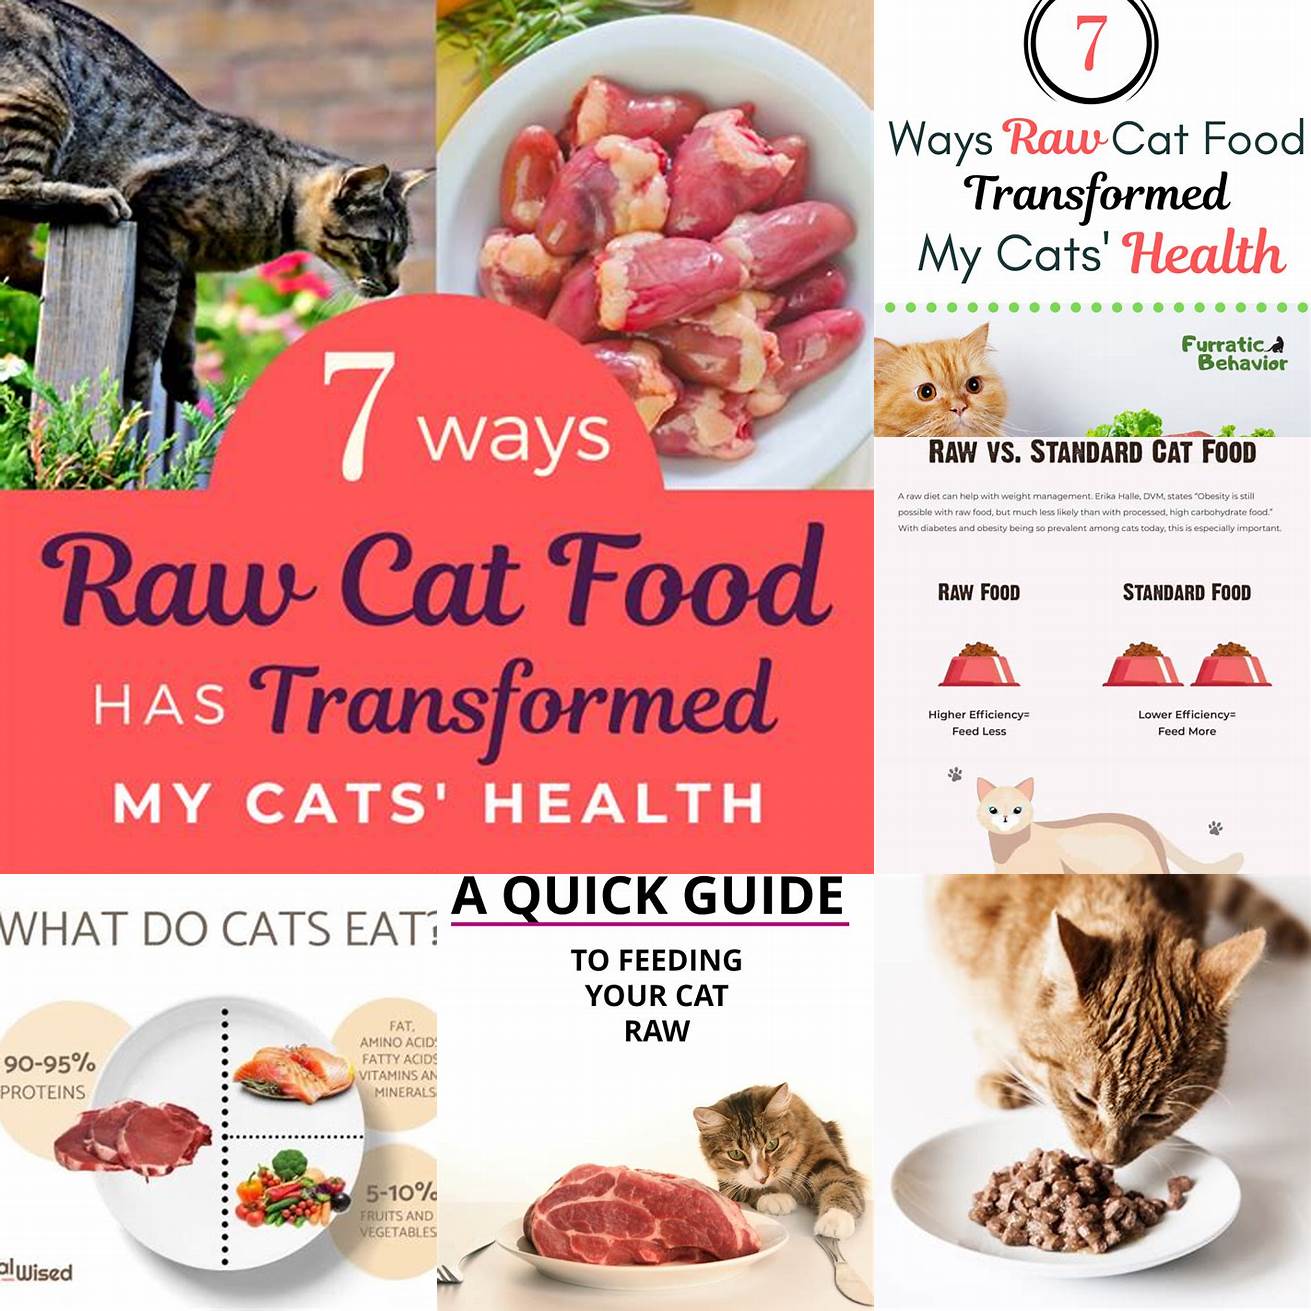 Always provide your cat with a balanced meat-based diet as their primary source of nutrition